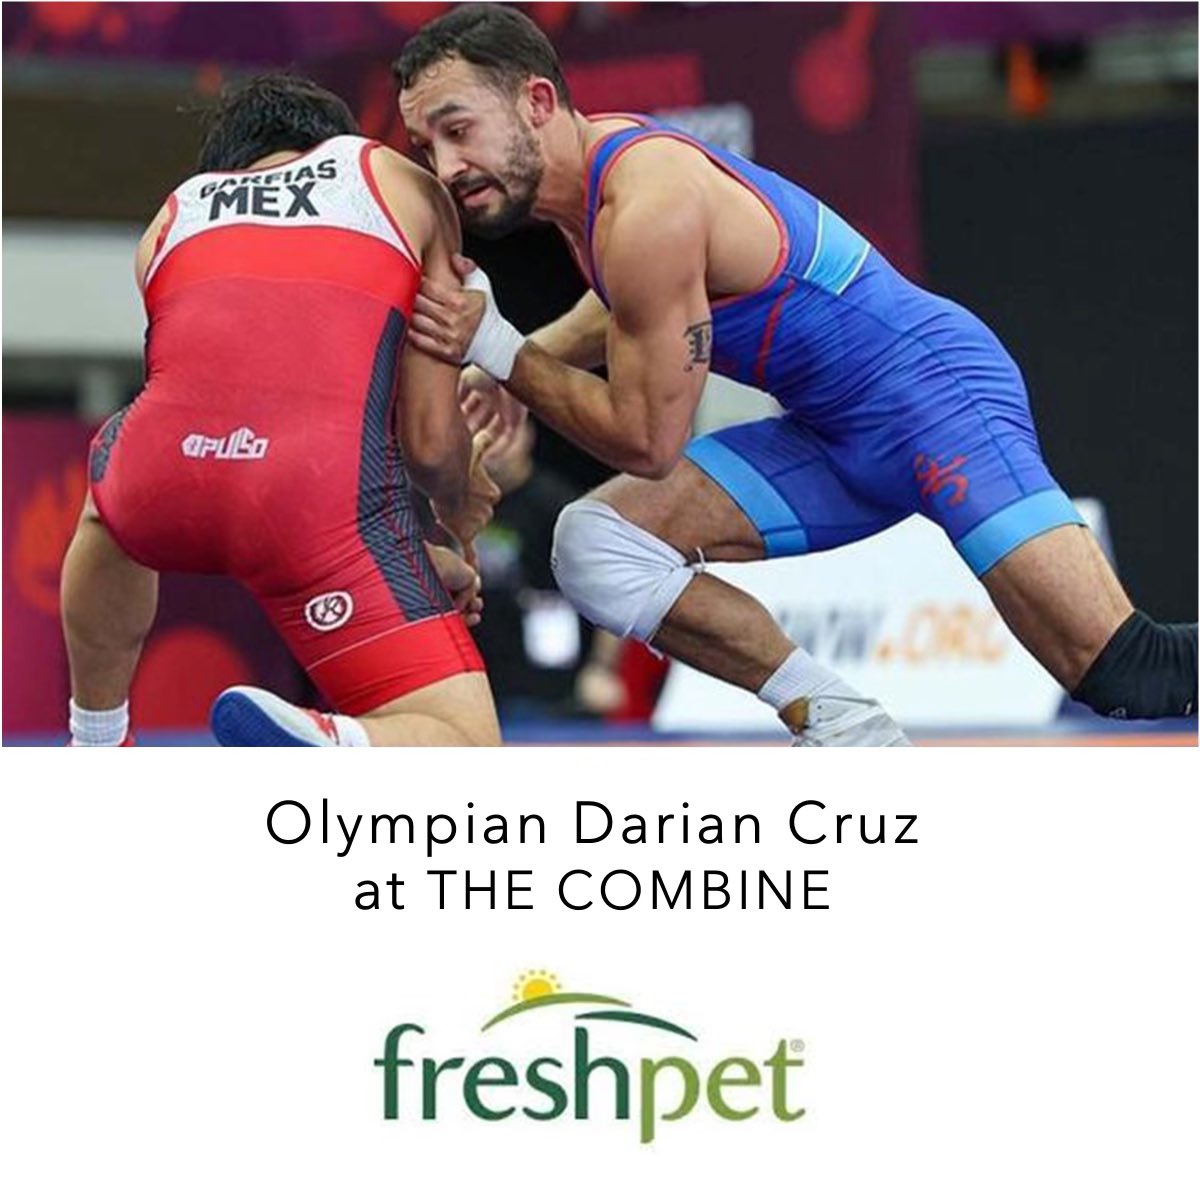 Big Thank You to Darian Cruz for coming to The Combine practice on Wednesday! The room was packed! And, a Big Thank You to Freshpet for making it happen!